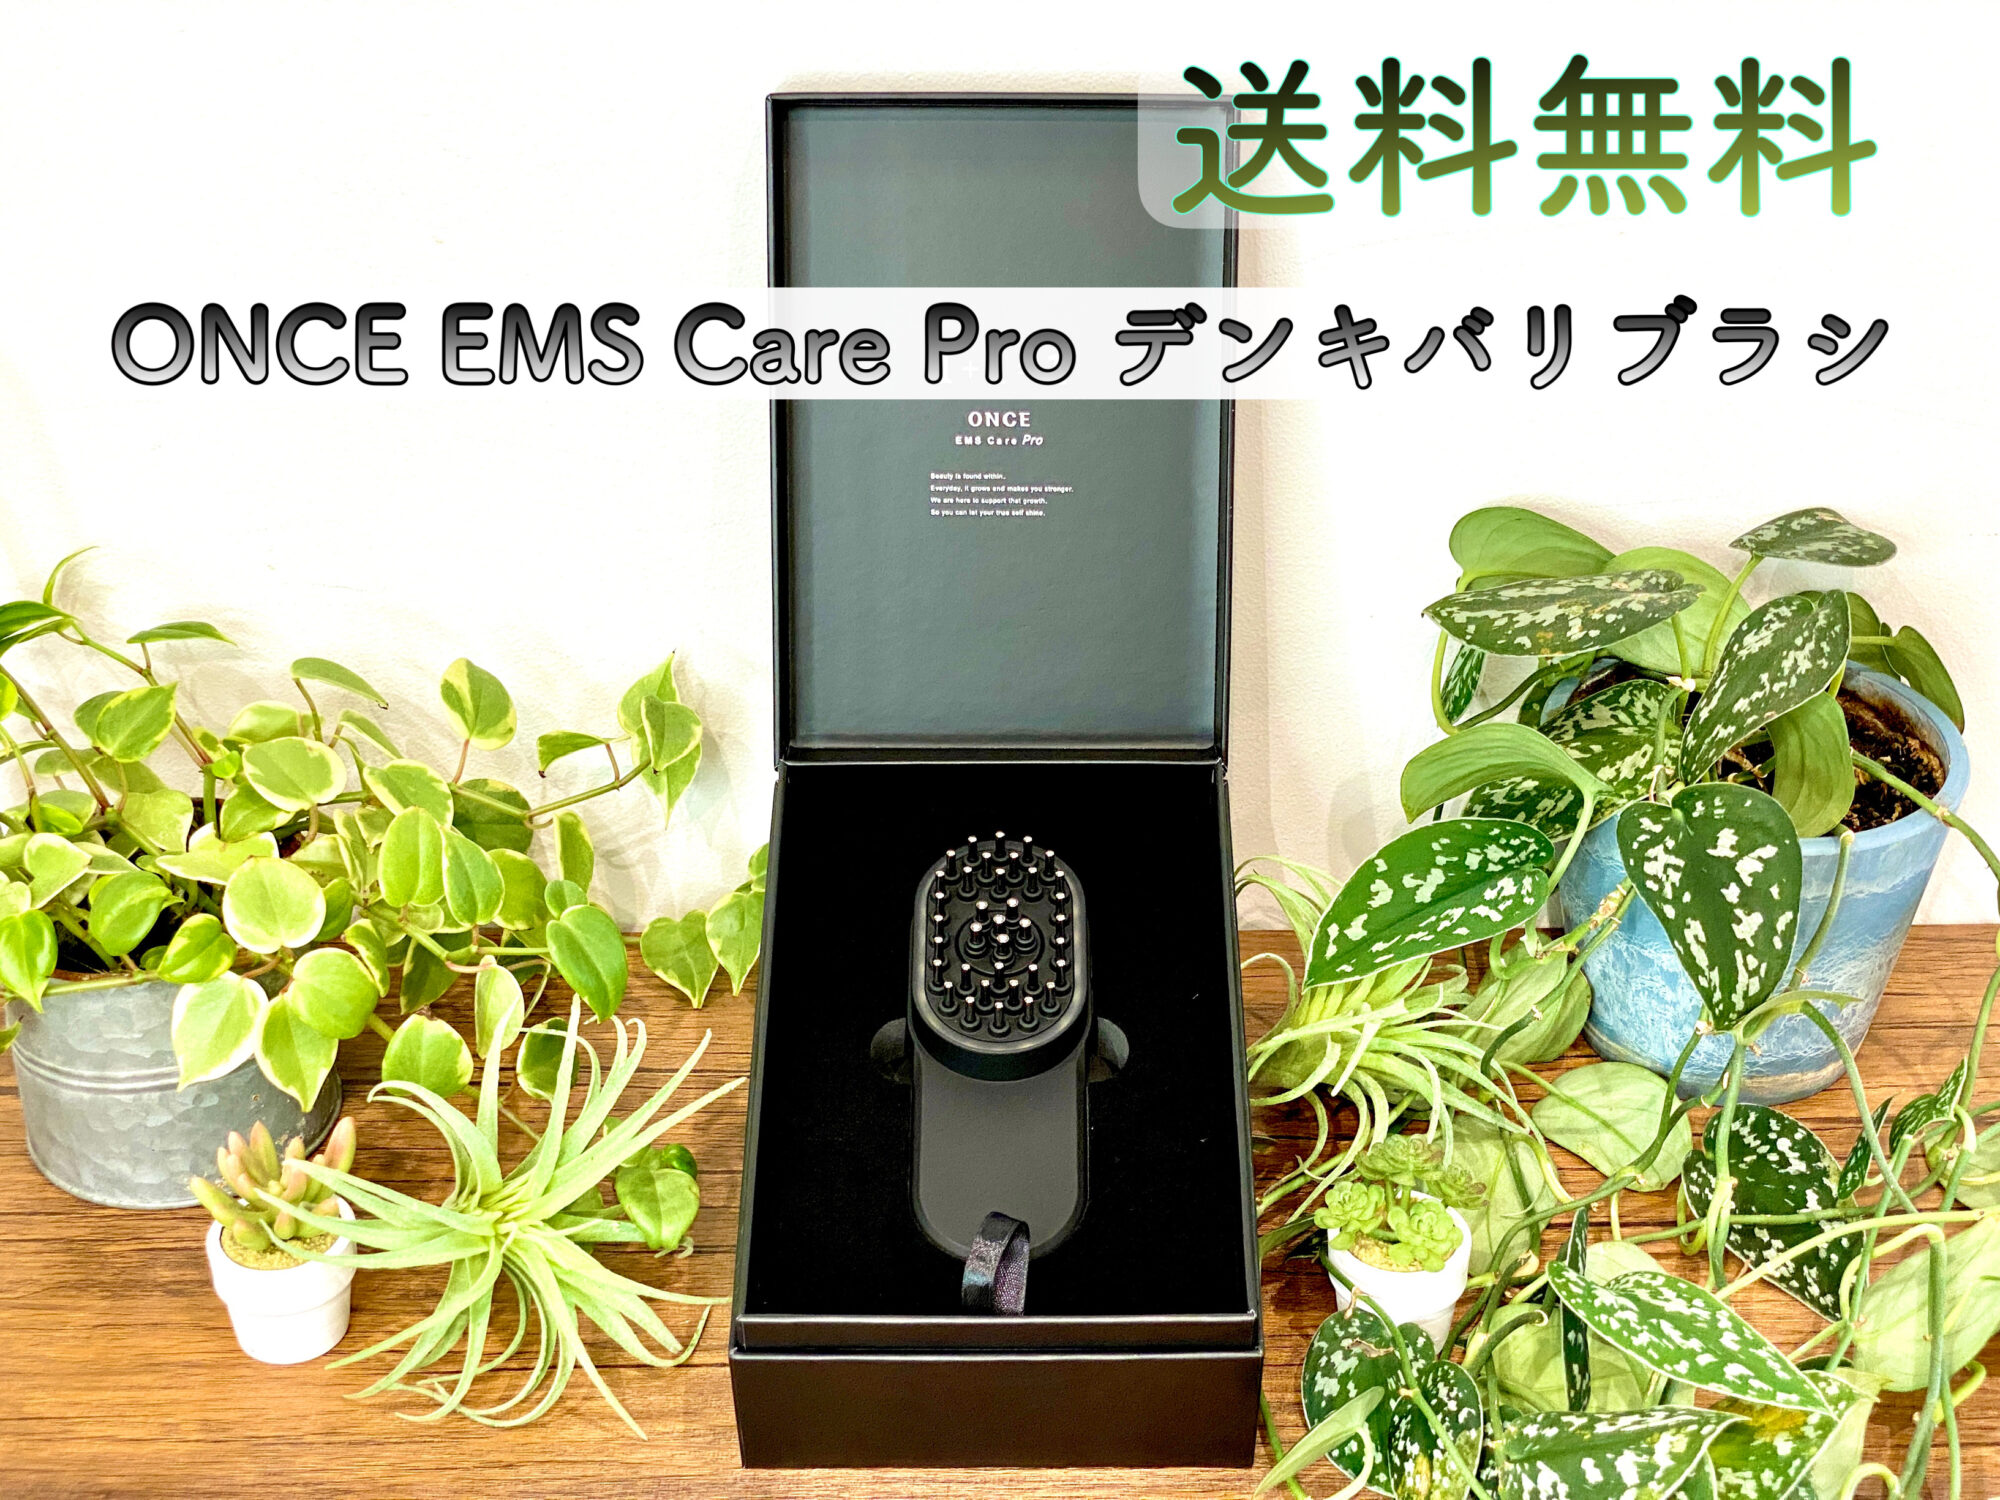 ONCE EMS Care Pro　新型　電気バリブラシ